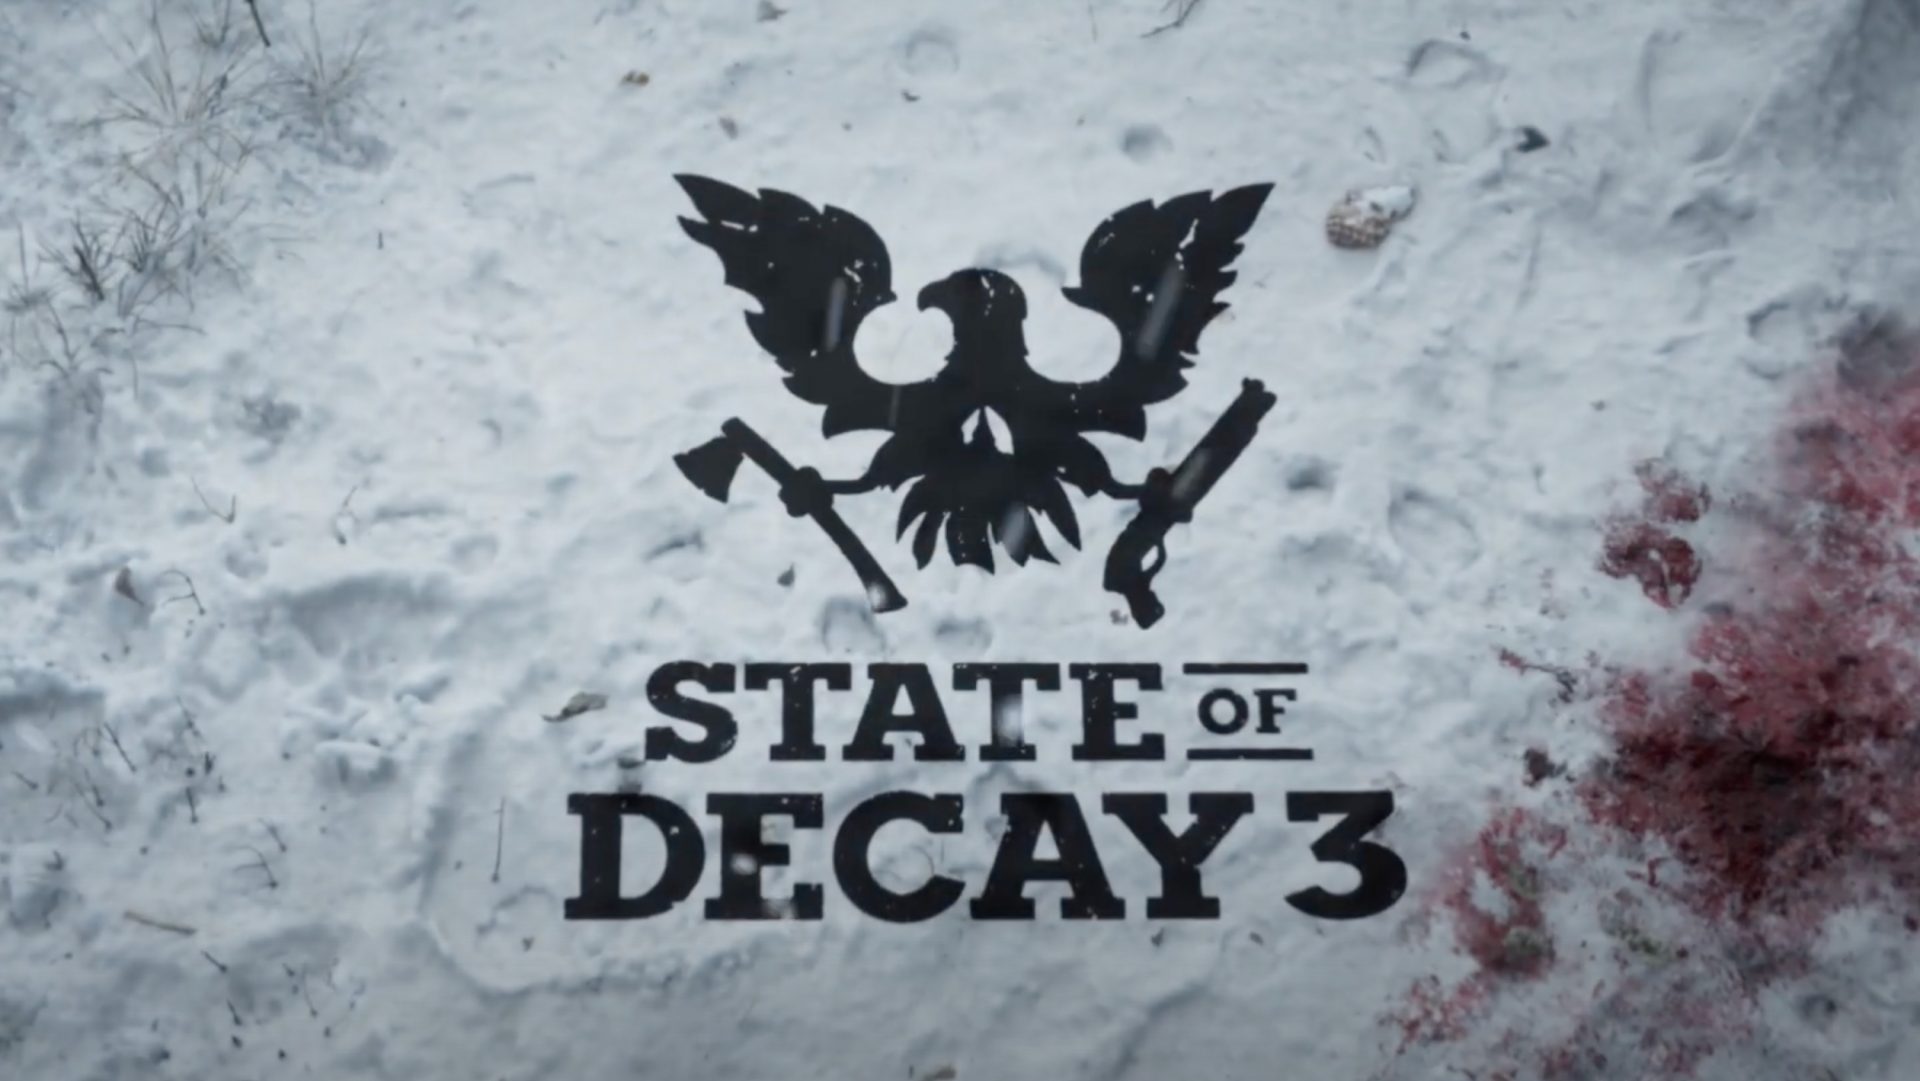 State of Decay 3 uses Unreal Engine 5 with help from The Coalition